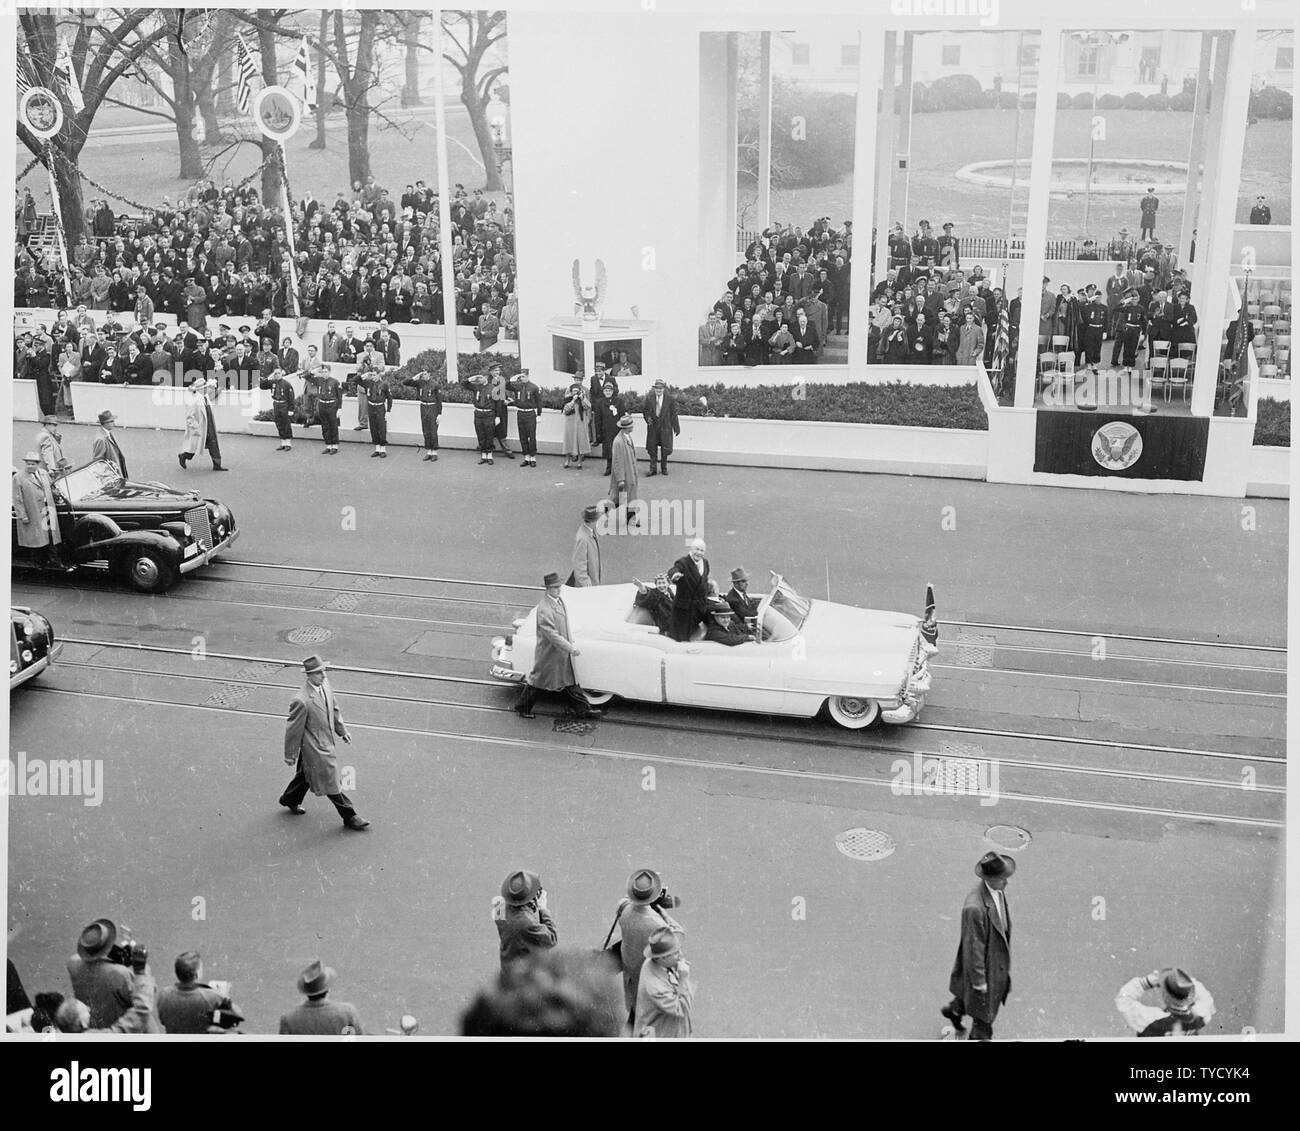 Photograph of President Dwight D. Eisenhower and First Lady Mamie Eisenhower waving to crowds as they ride in the Inaugural parade. Stock Photo